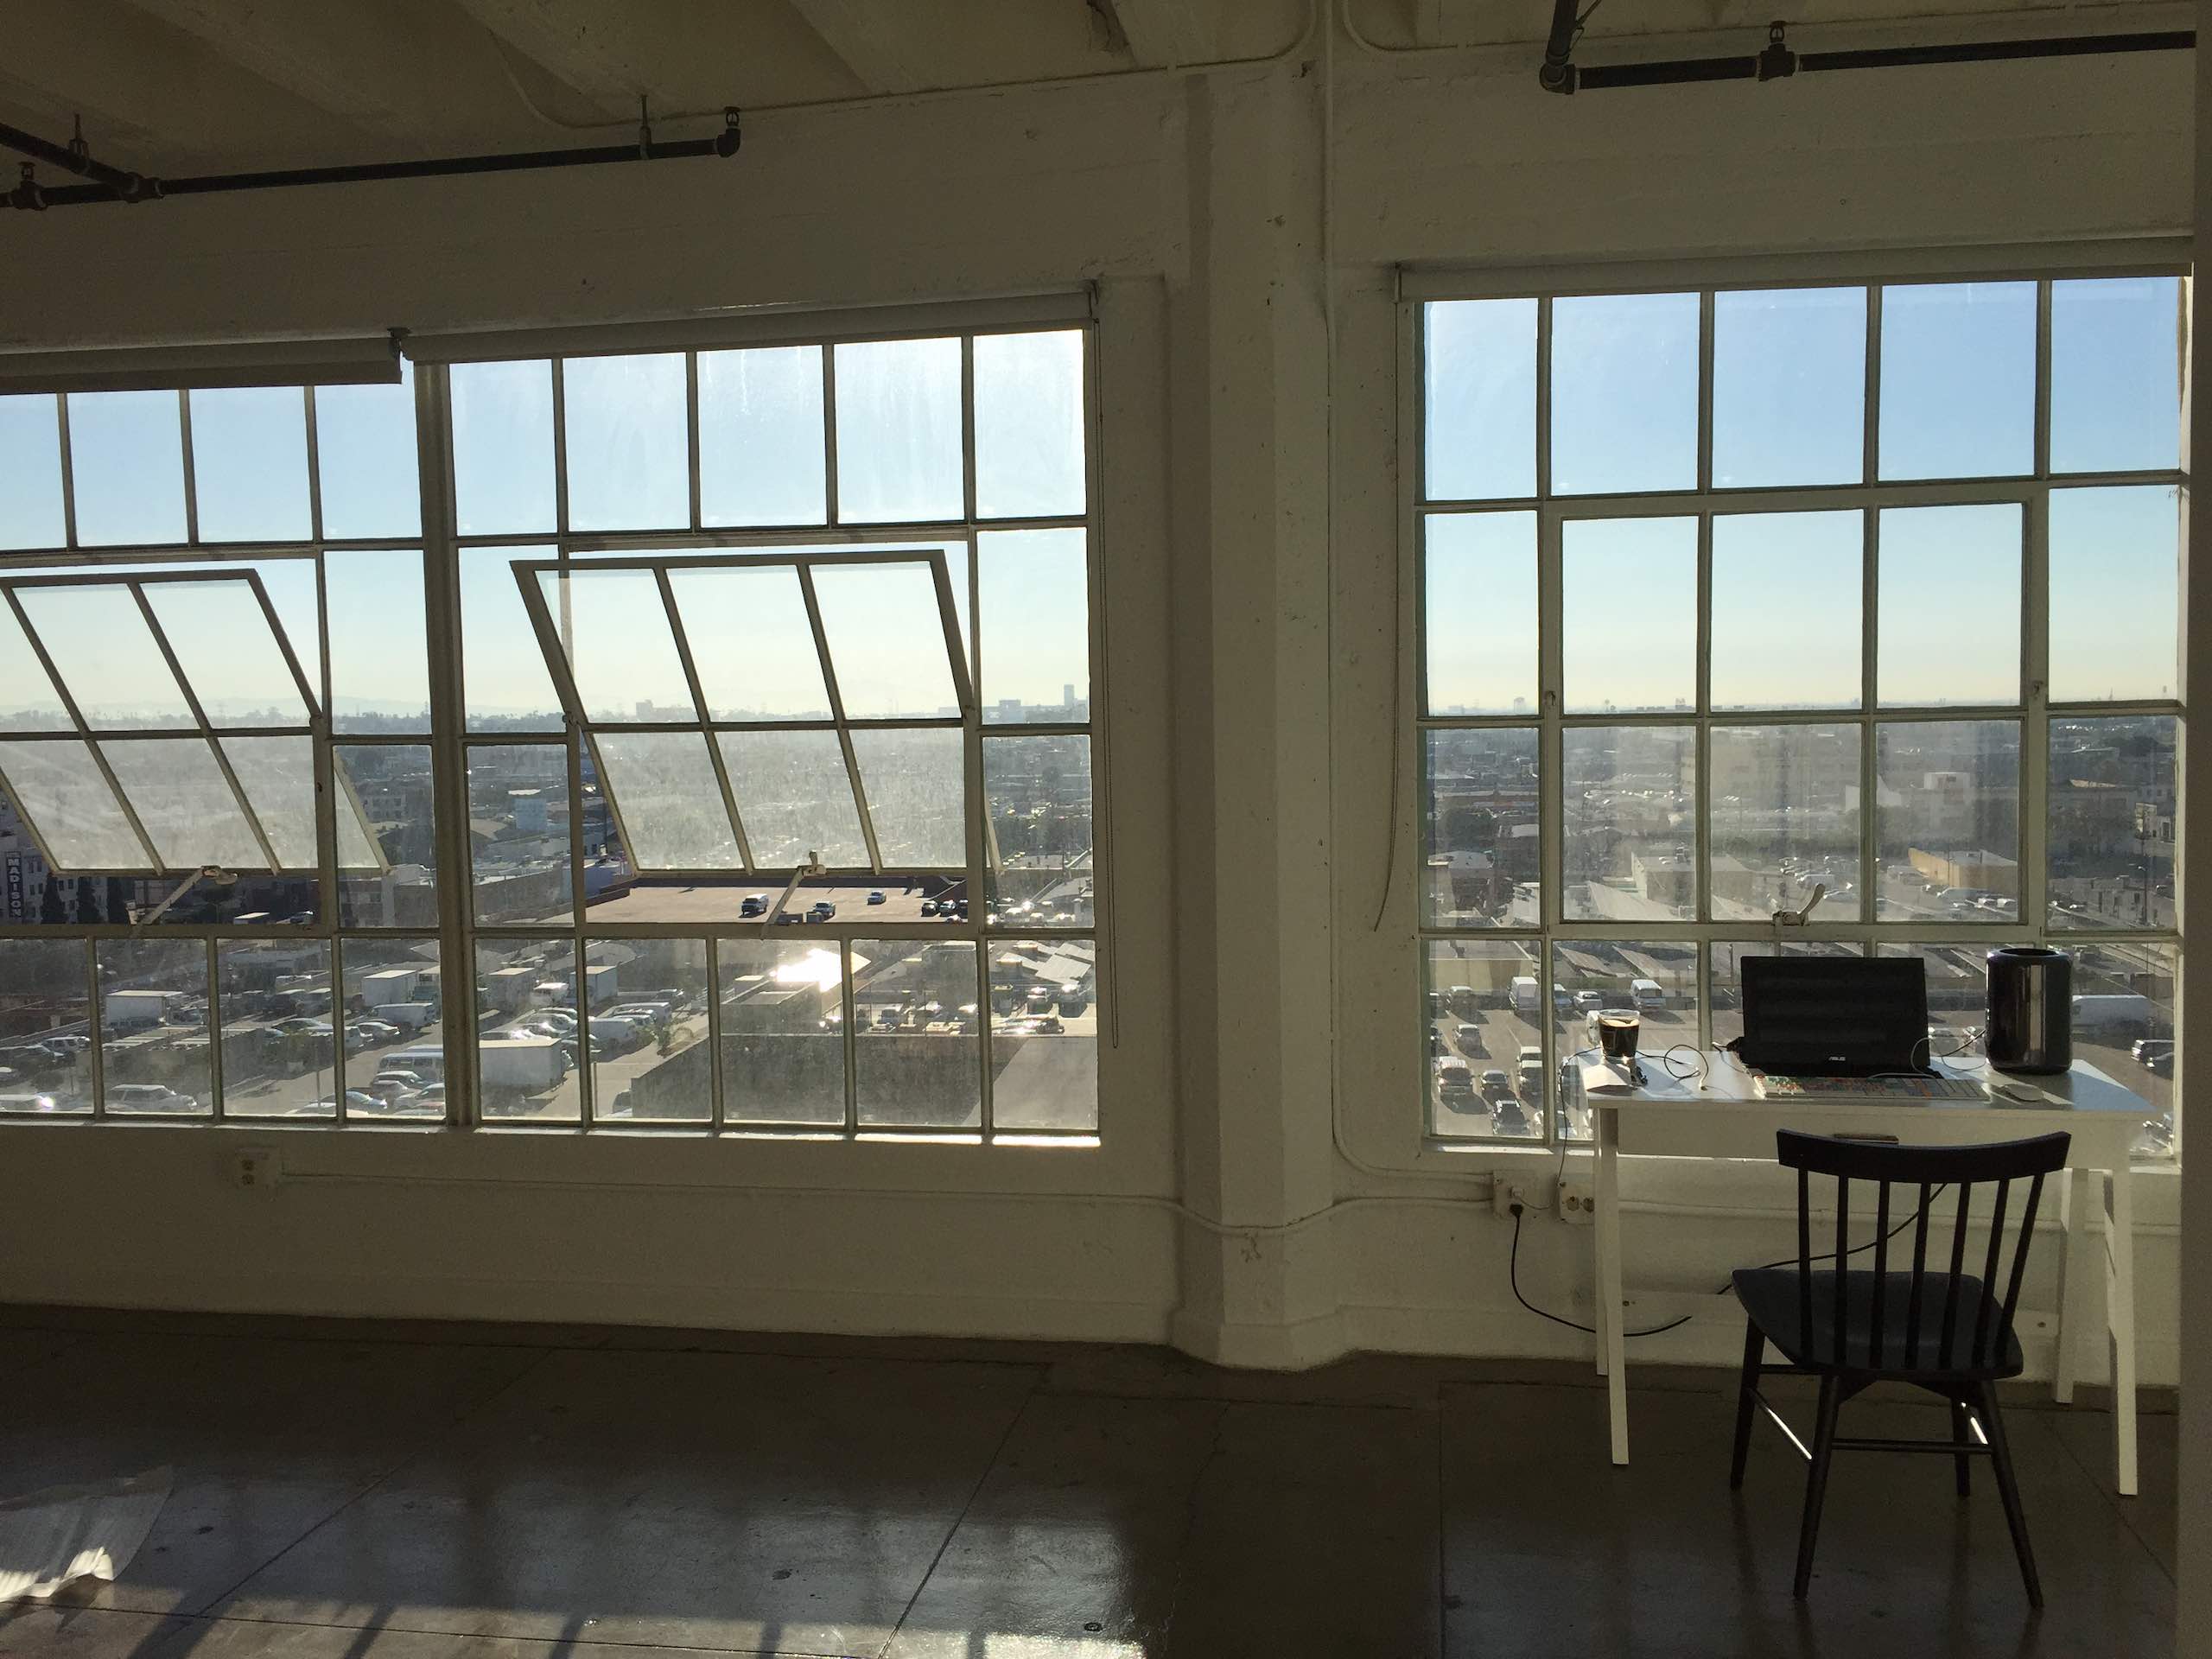 Studio Locations Downtown LA Loft with view looking out windows of a building over the city with table with computer and chair